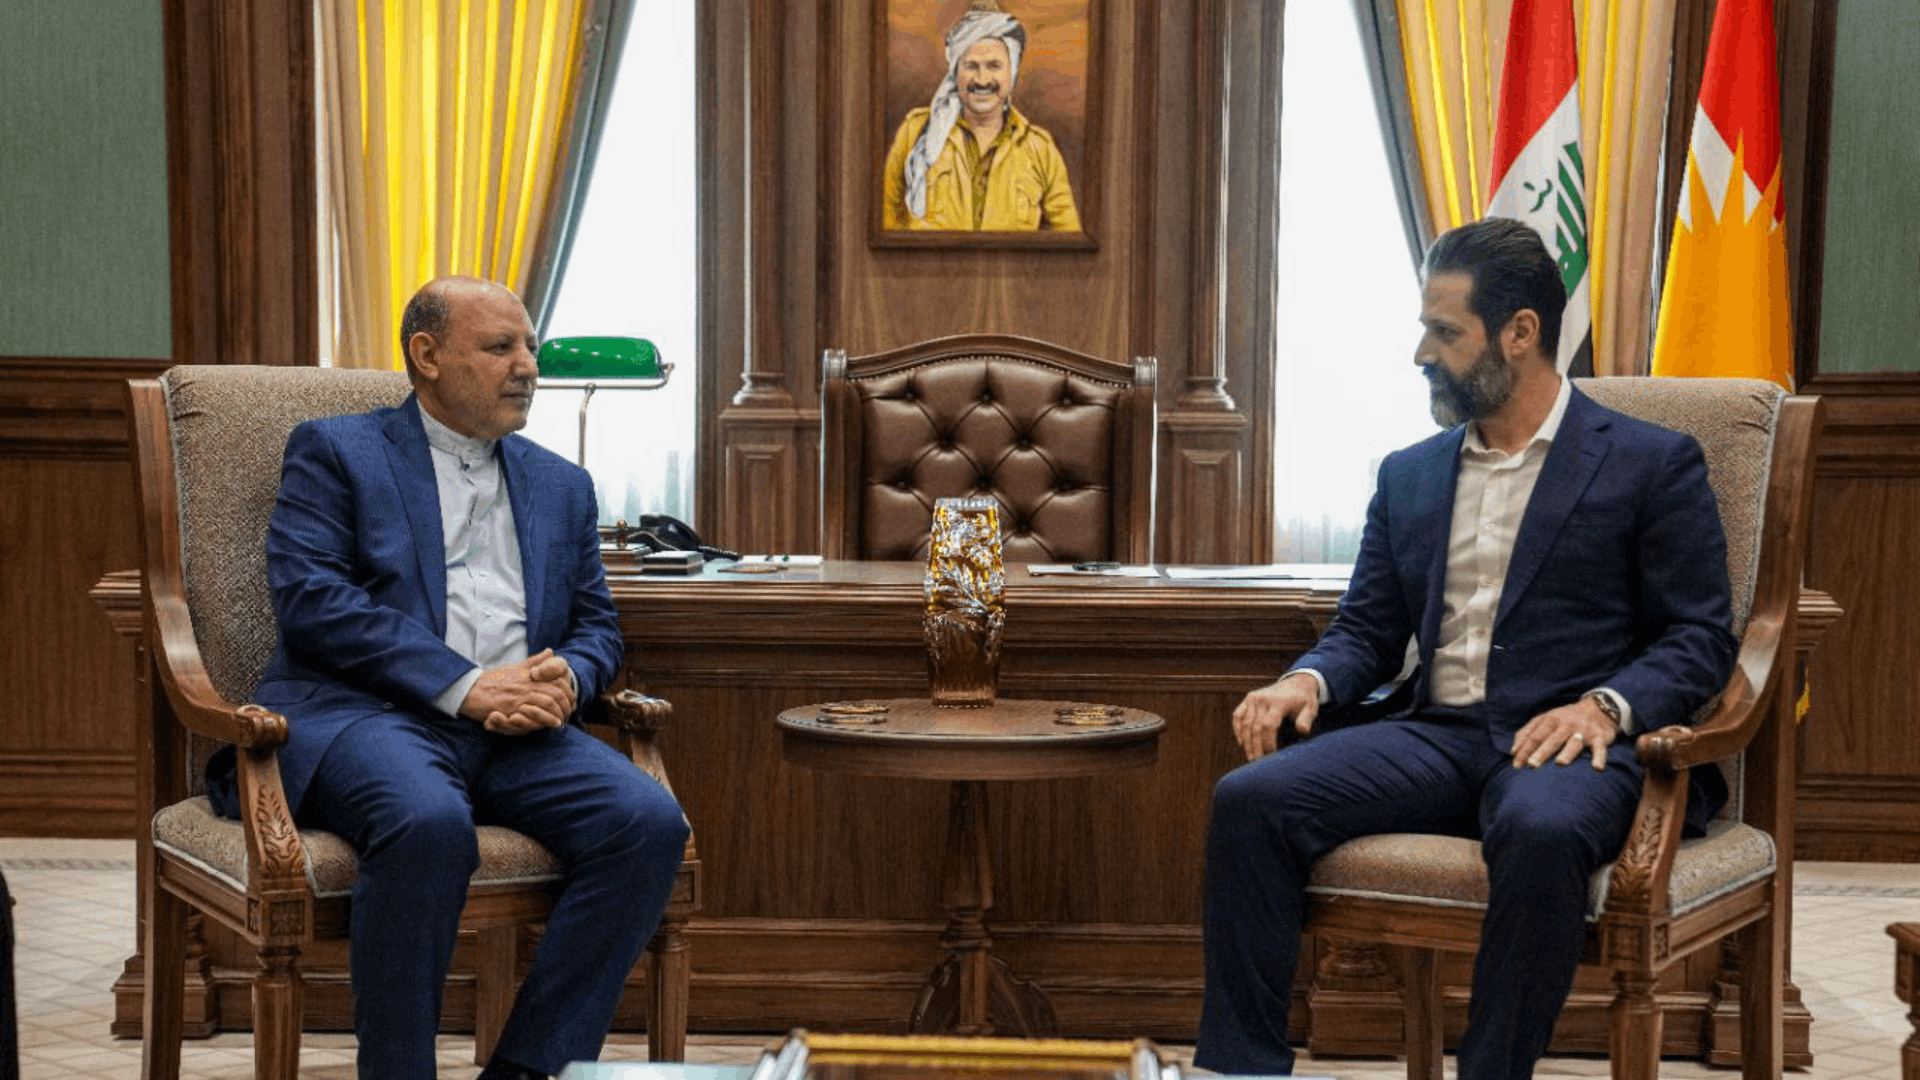  Deputy Prime Minister and Iranian Consul General met in Erbil